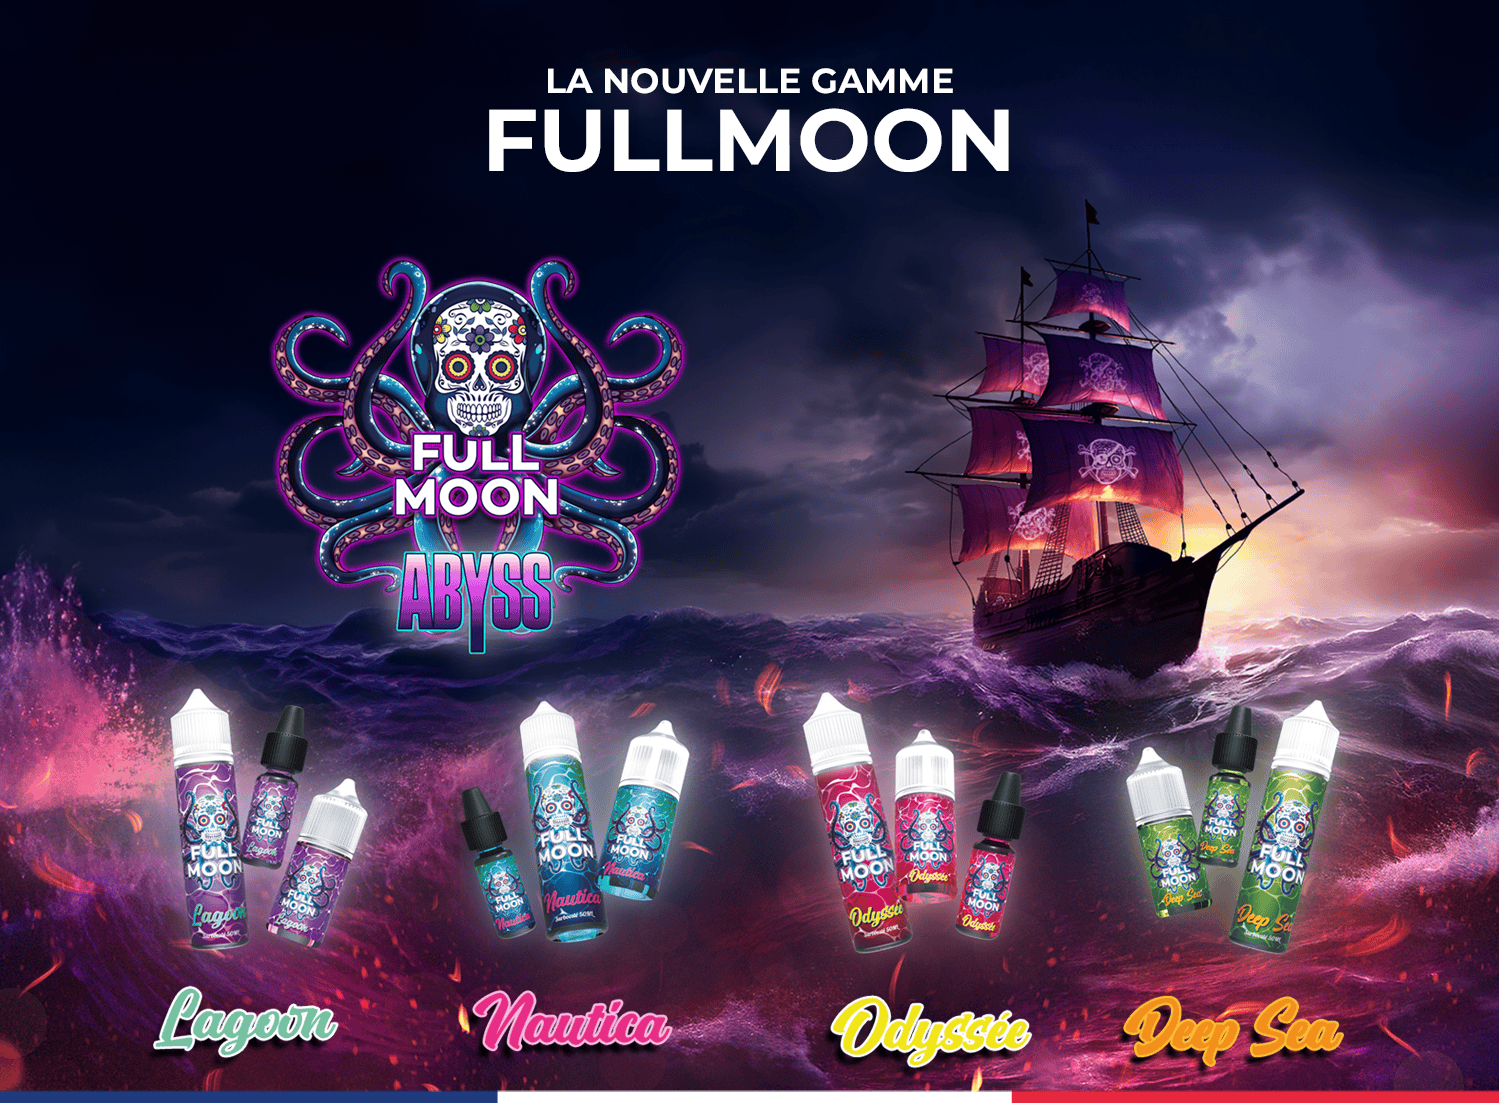 Full Moon Abyss annonce